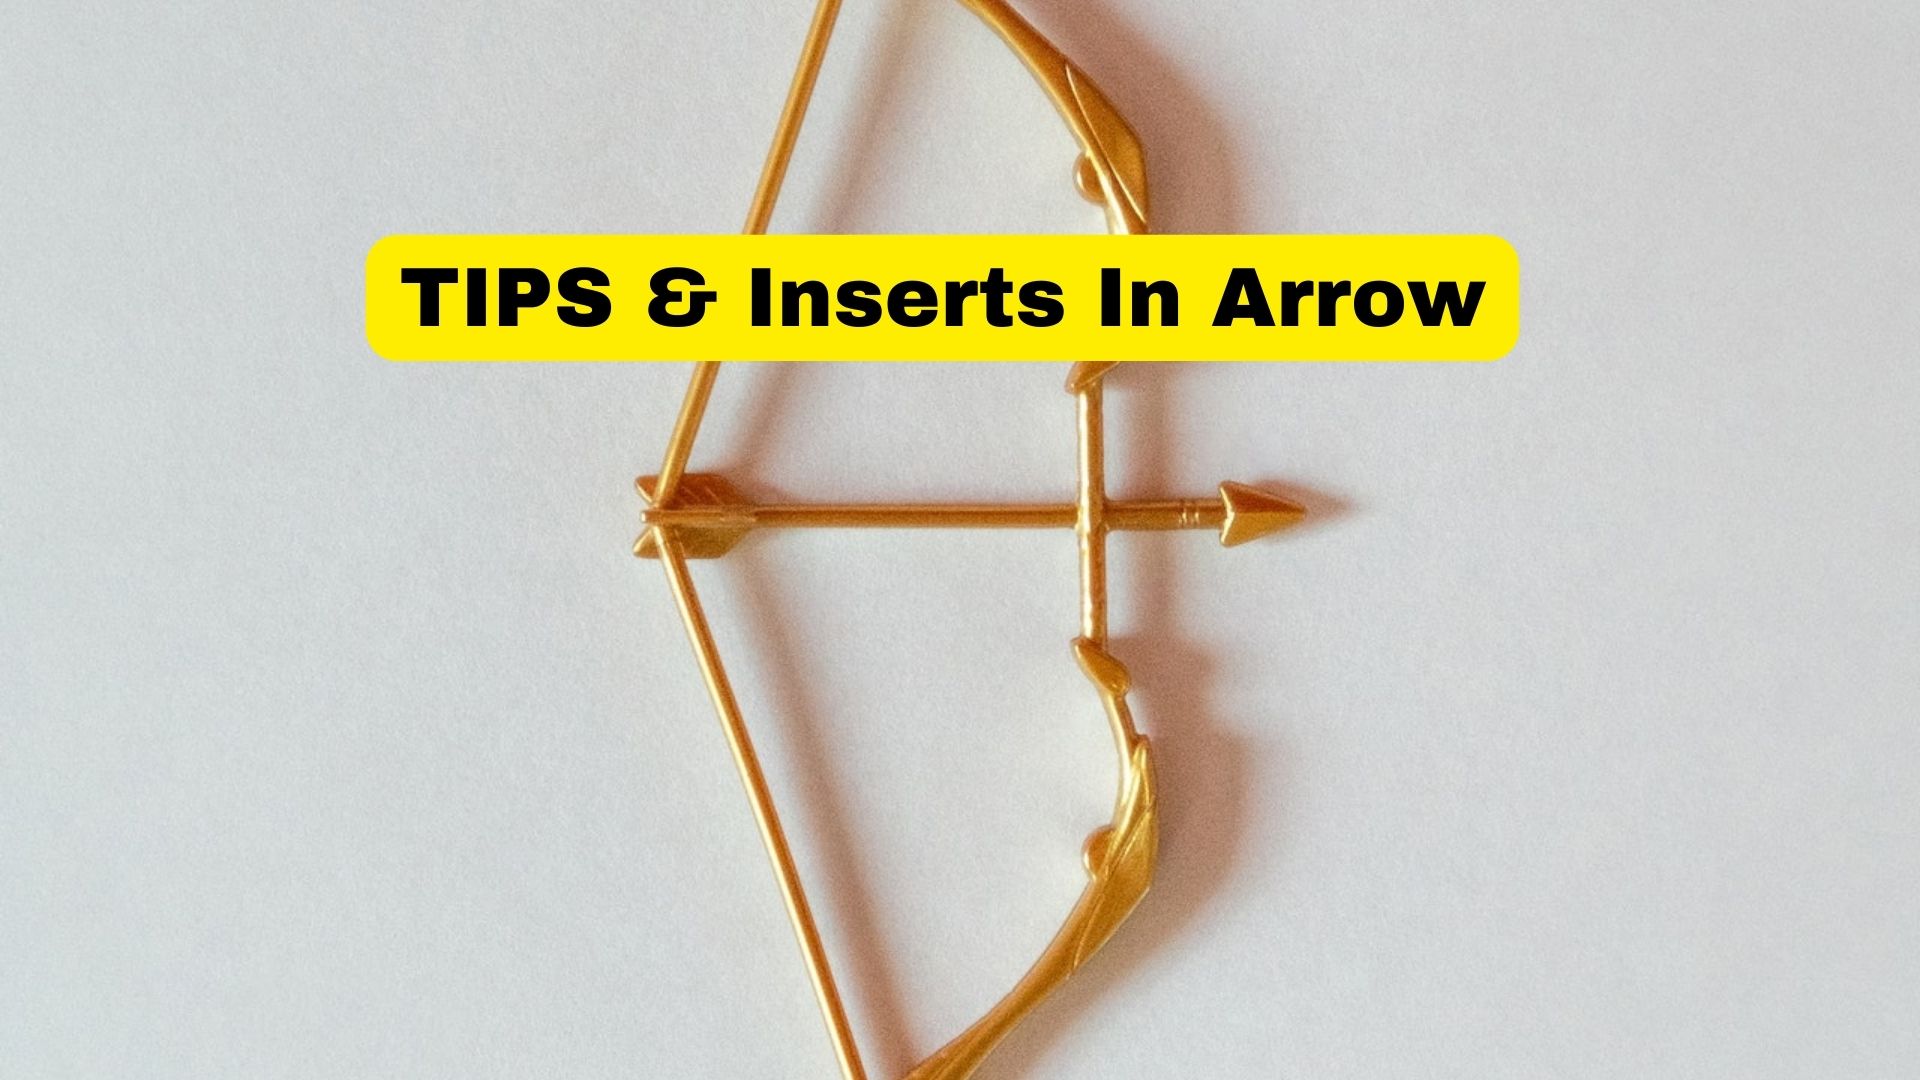 How to Install Arrow Inserts